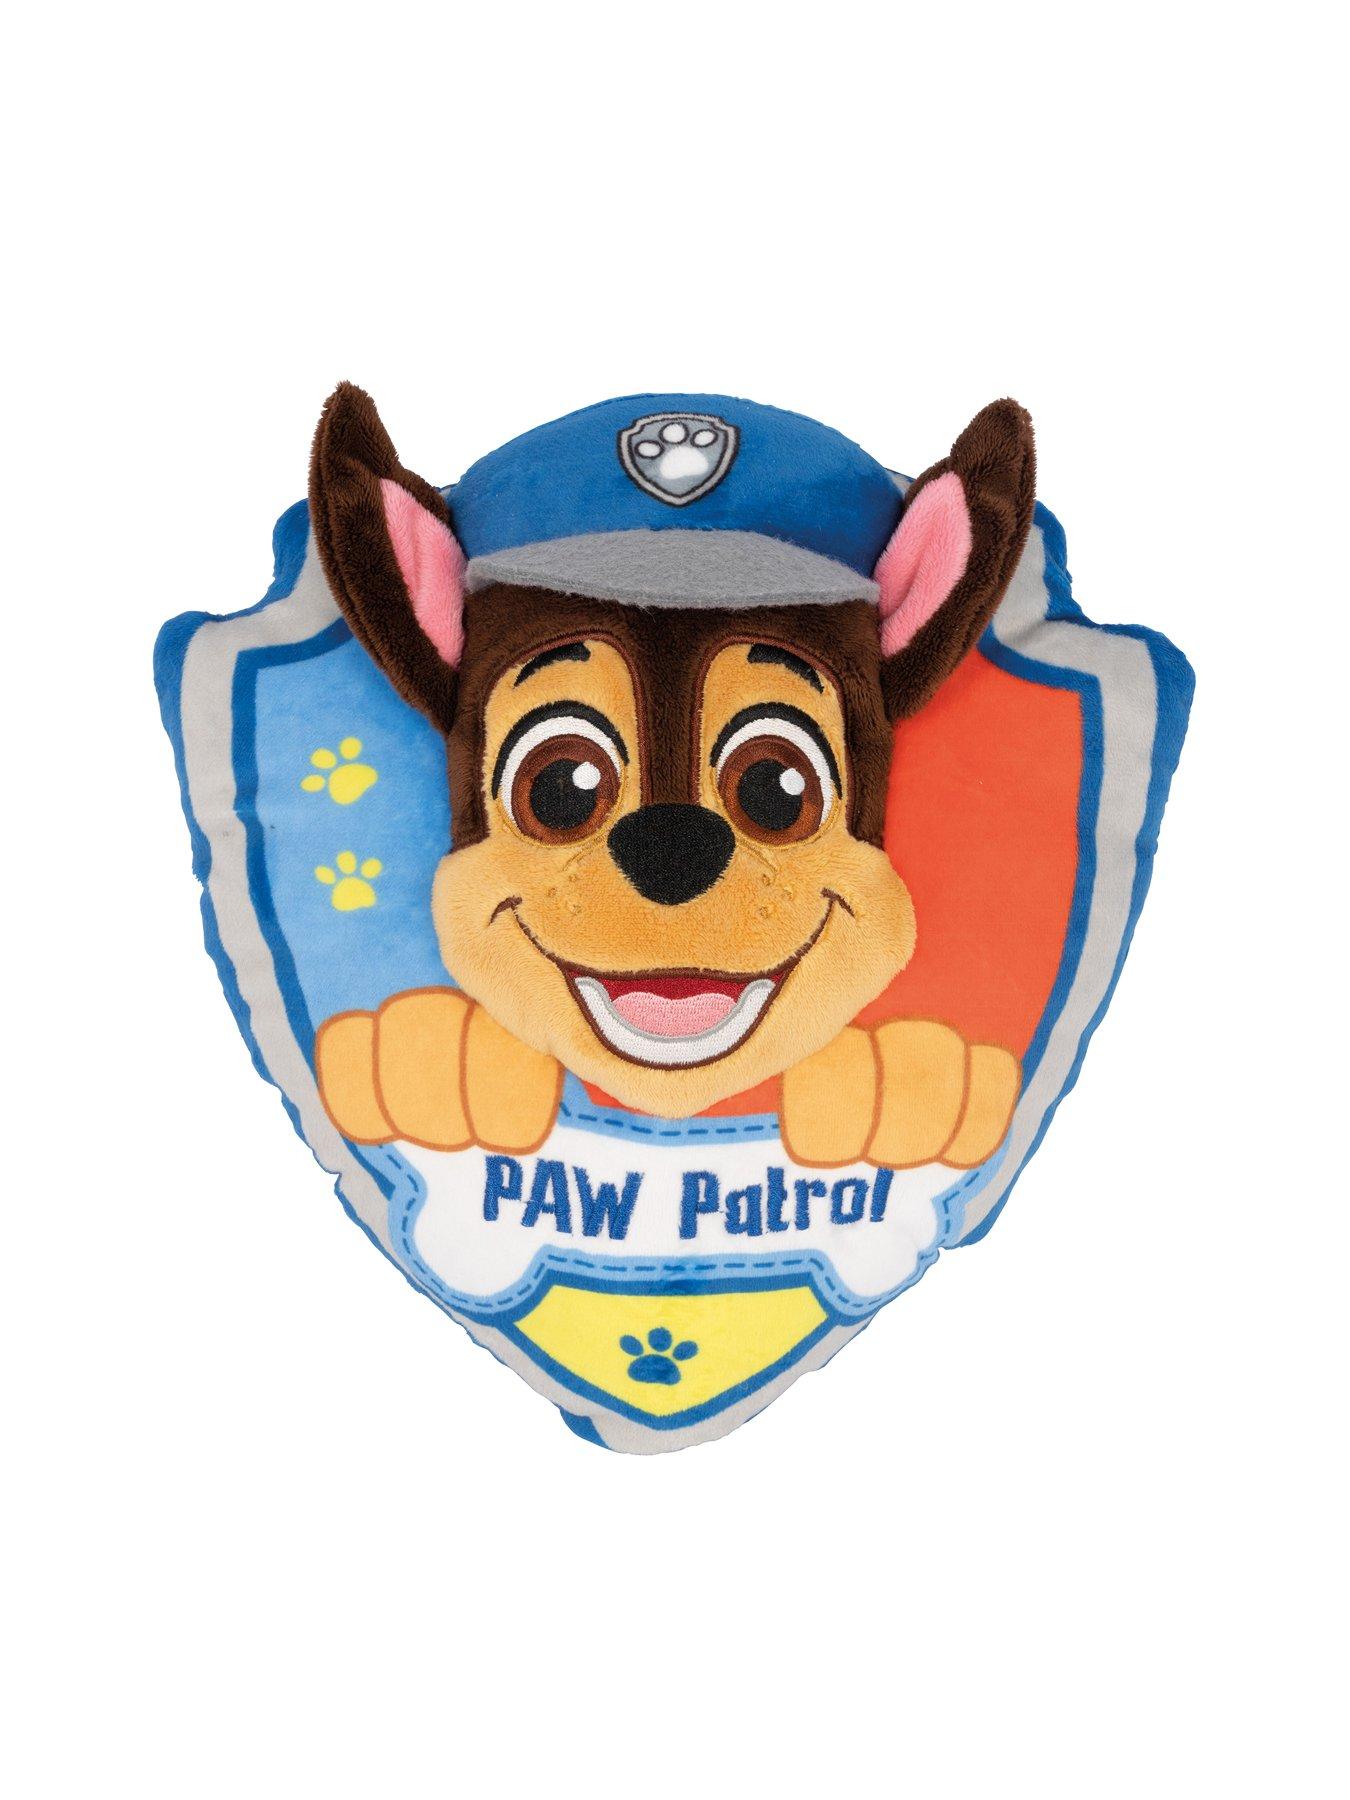 Paw Patrol Baby Favourite Characters Including Skye, Chase & Marshall.  Machine Washable. 100% Cotton (Pack of 2)